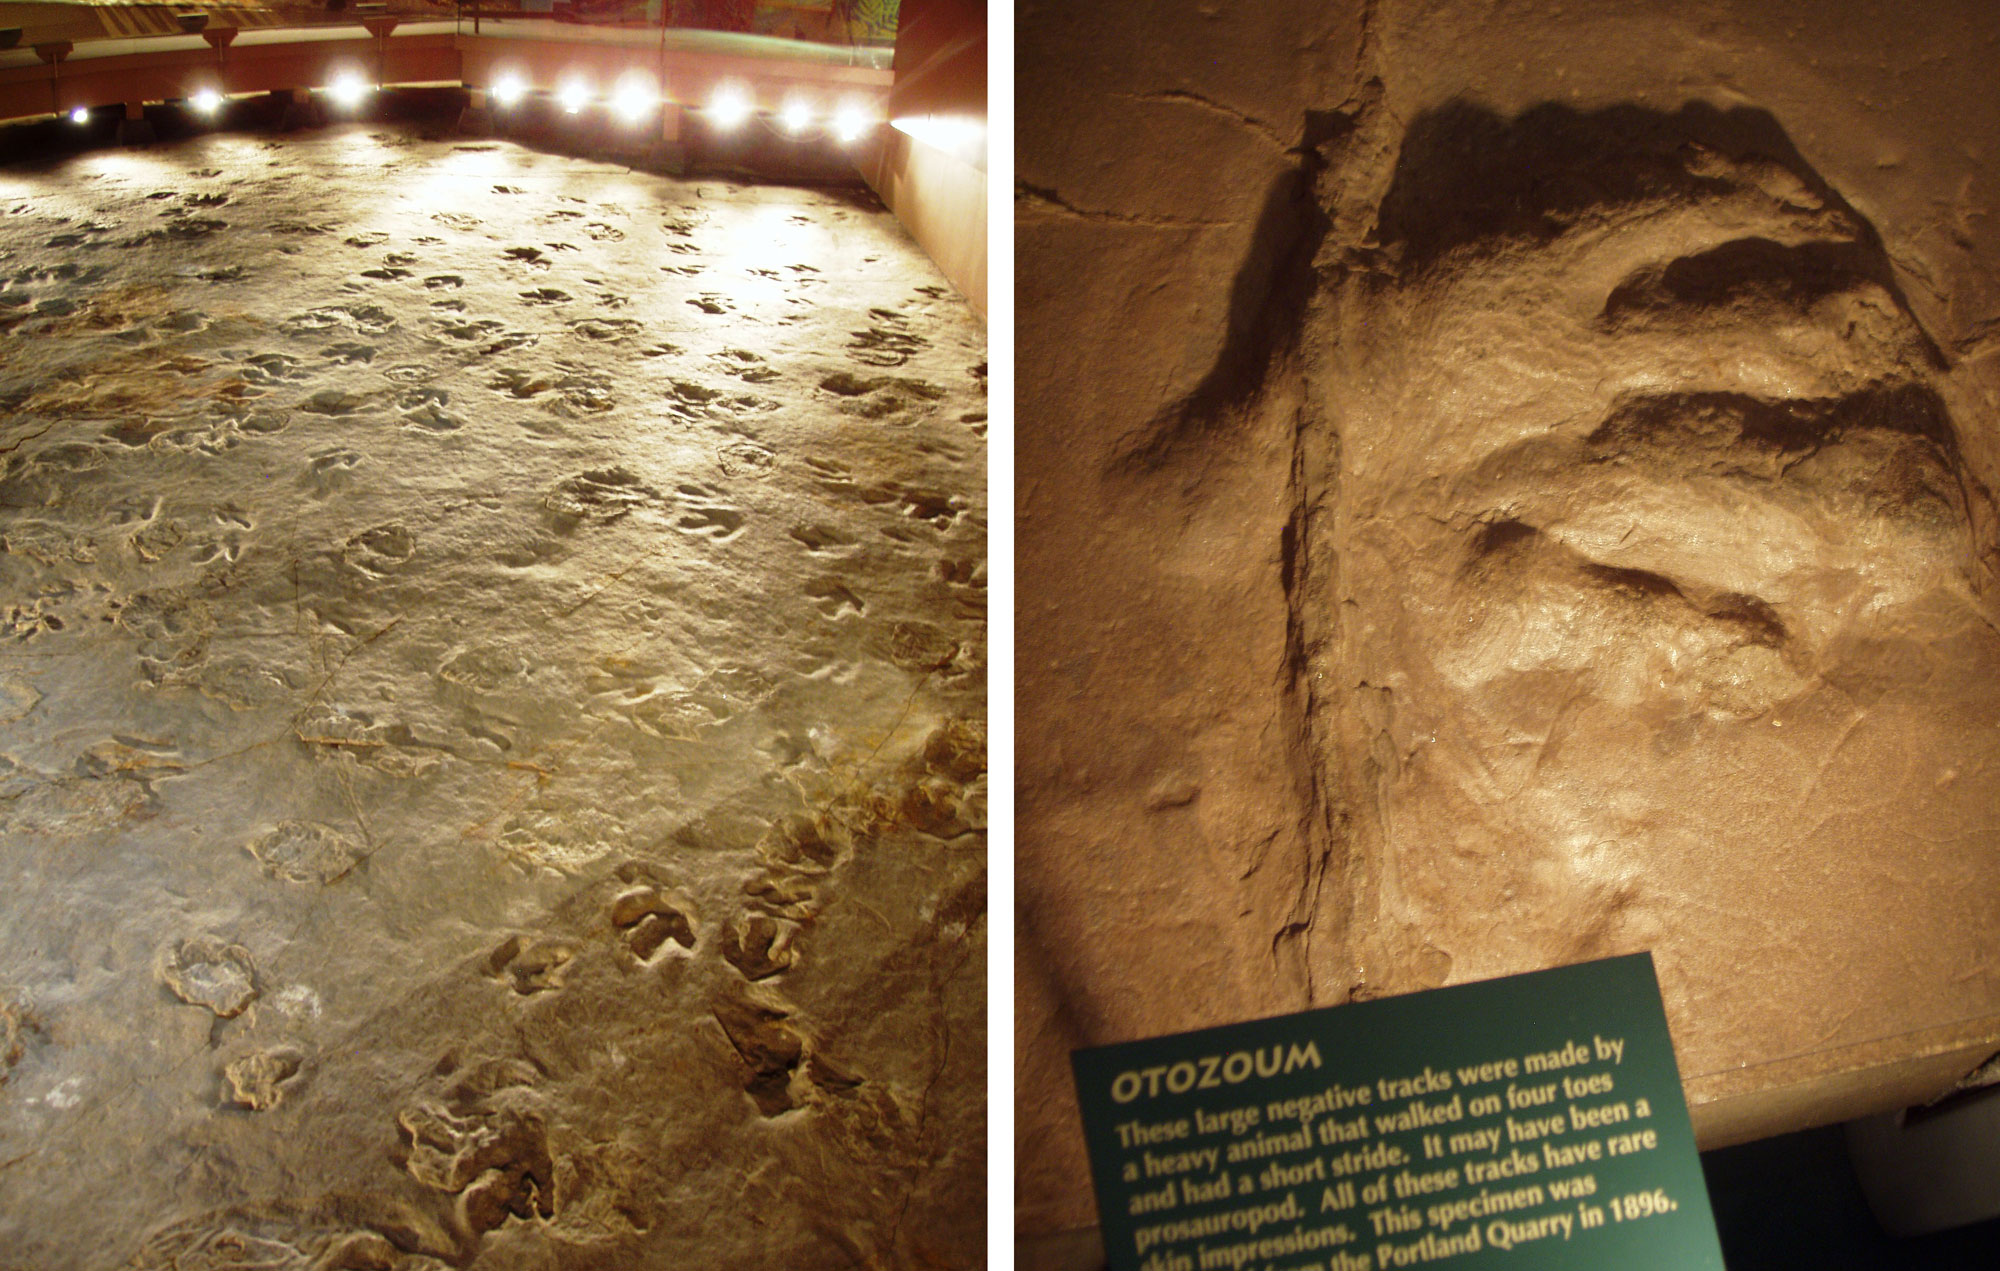 2-panel image showing photographs of dinosaur tracks. Panel 1: Photograph of a trackway with hundreds of 3-toed footprints preserved under a dome at Dinosaur State Park in Connecticut. Panel 2: Photograph of a single, four-toed Otozoum track collected from a quarry in Connecticut.